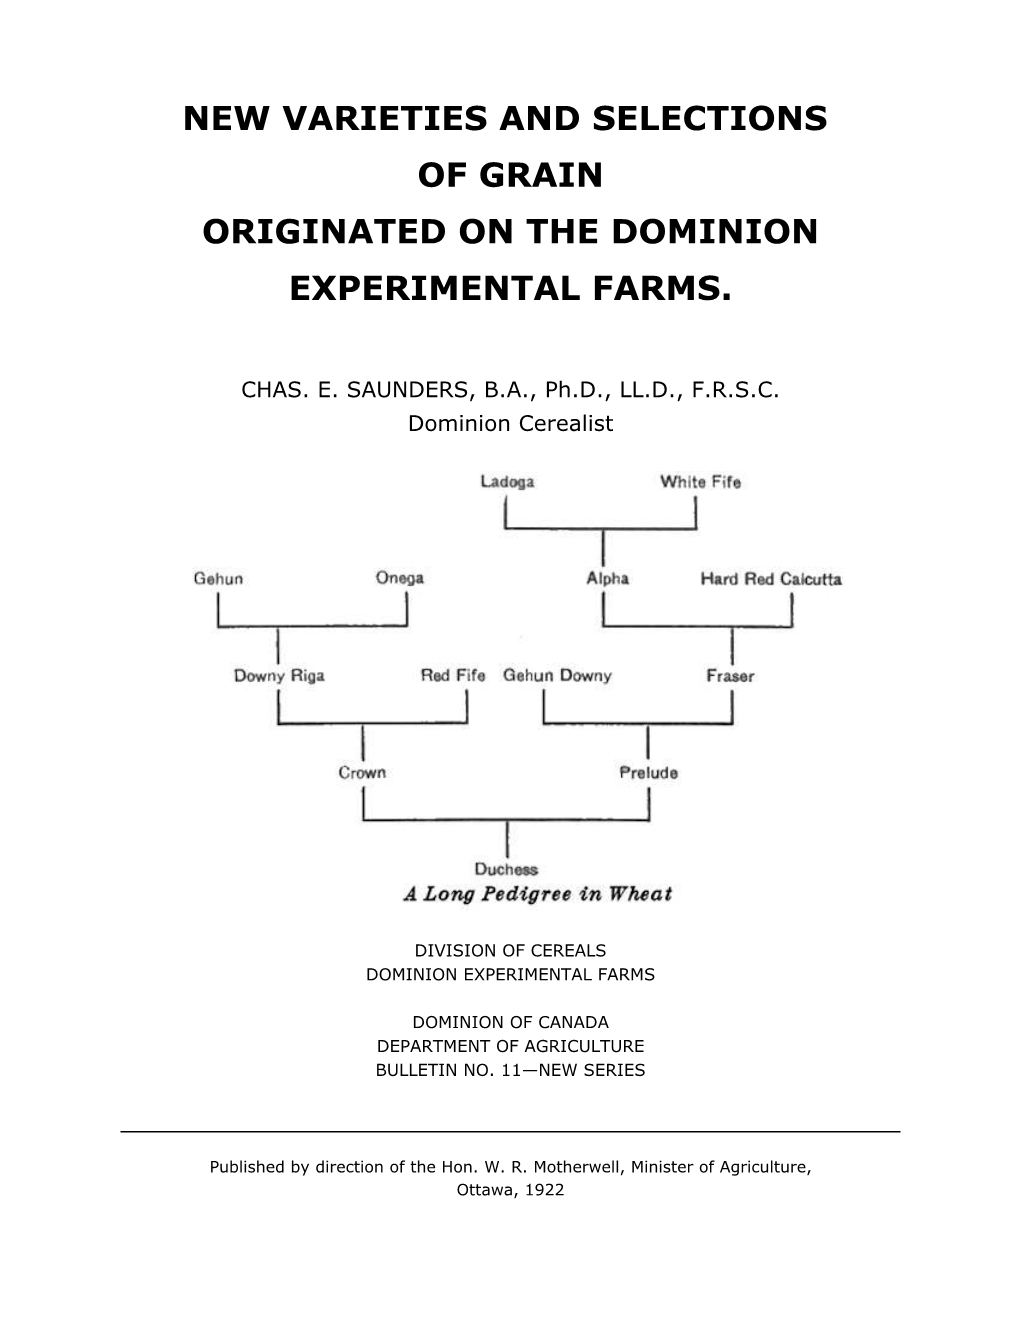 New Varieties and Selections of Grain Originated on the Dominion Experimental Farms